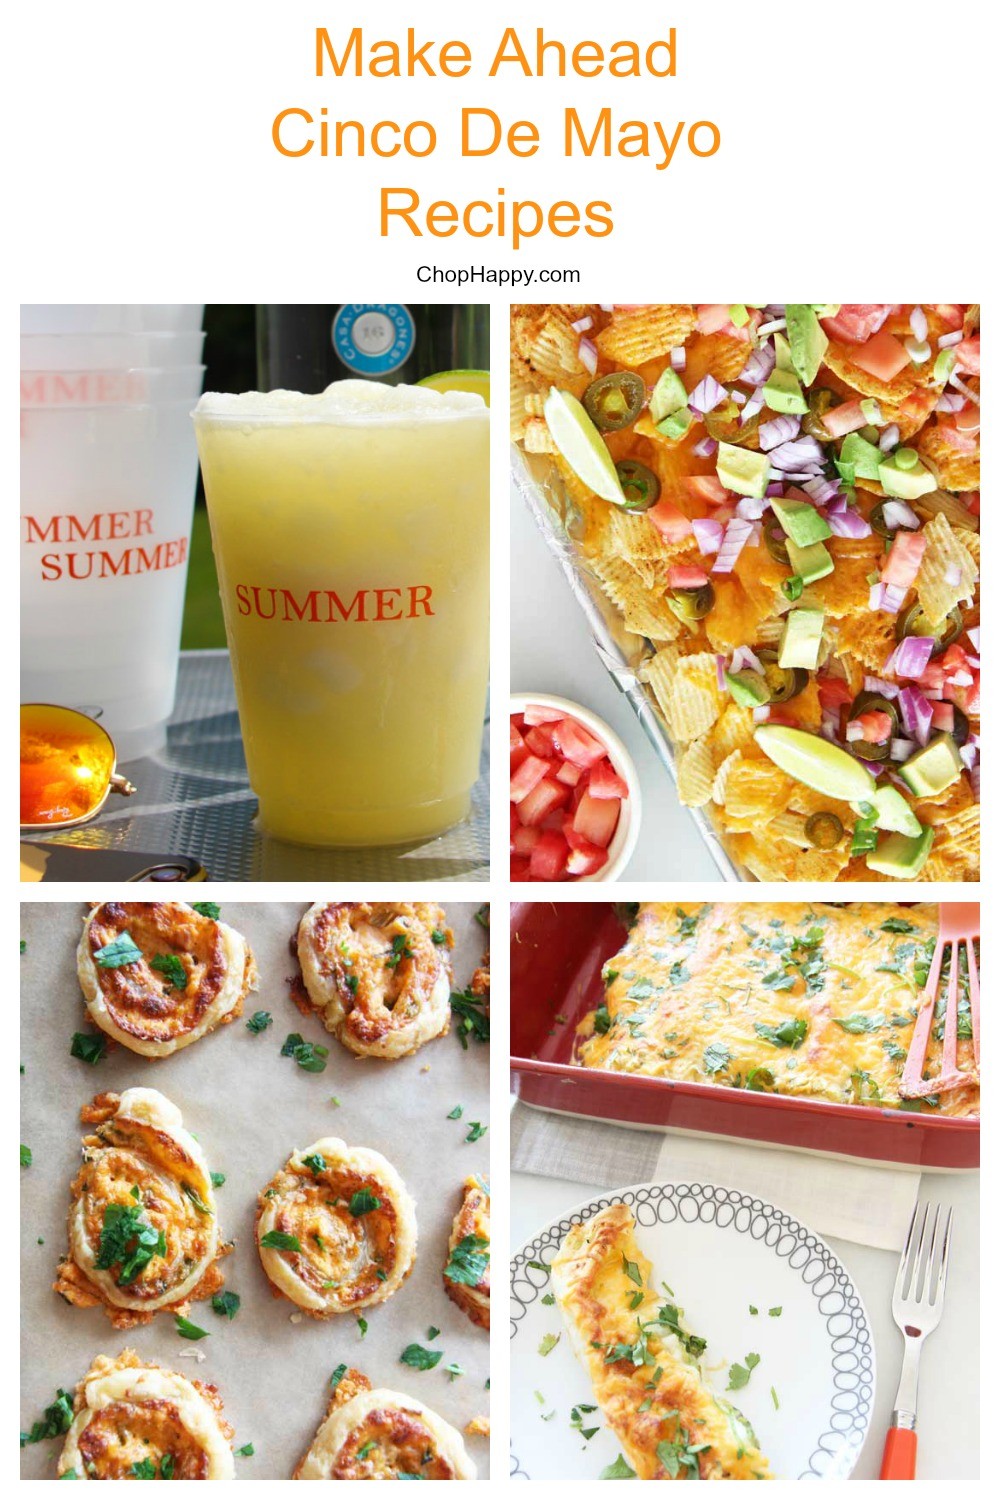 How To Throw A Make Ahead Cinco De Mayo Party Recipes. Grab your margarita, enchiladas, and party. Happy celebrating life and friends. www.ChopHappy.com #CincoDeMayo #partyrecipes